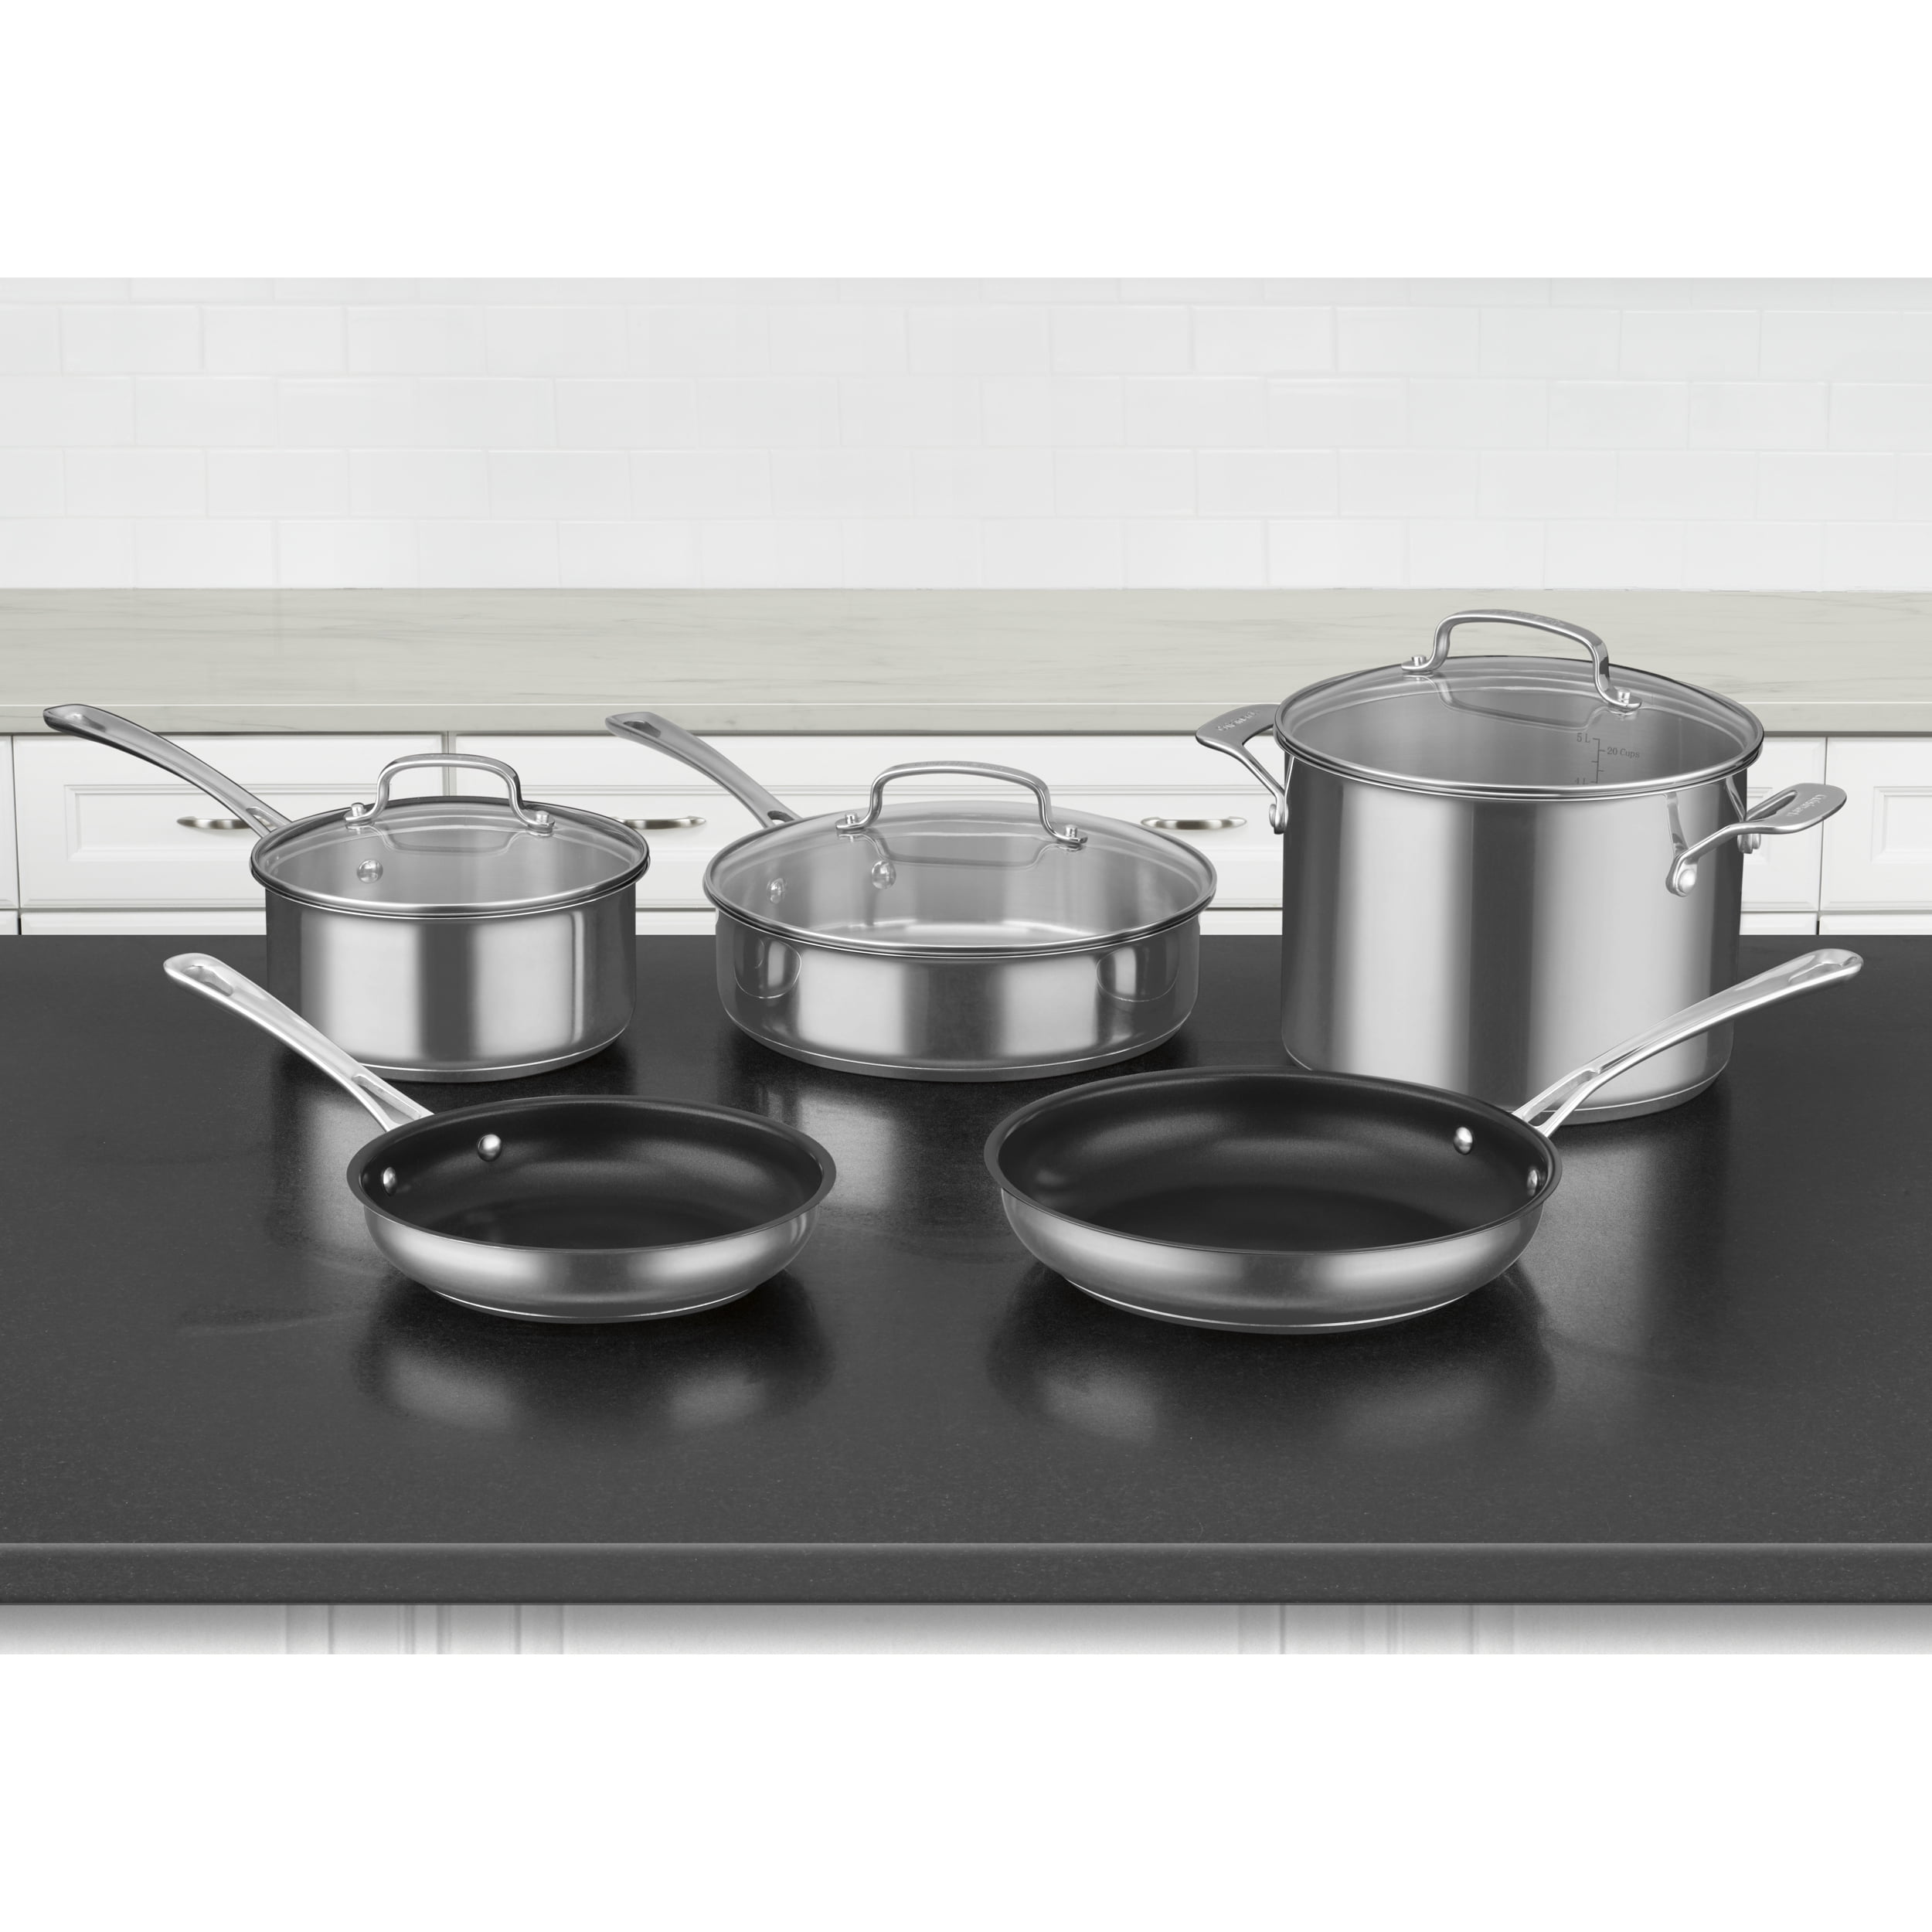 Cuisinart Chef's Classic Stainless Steel 8 Piece Cookware Set 